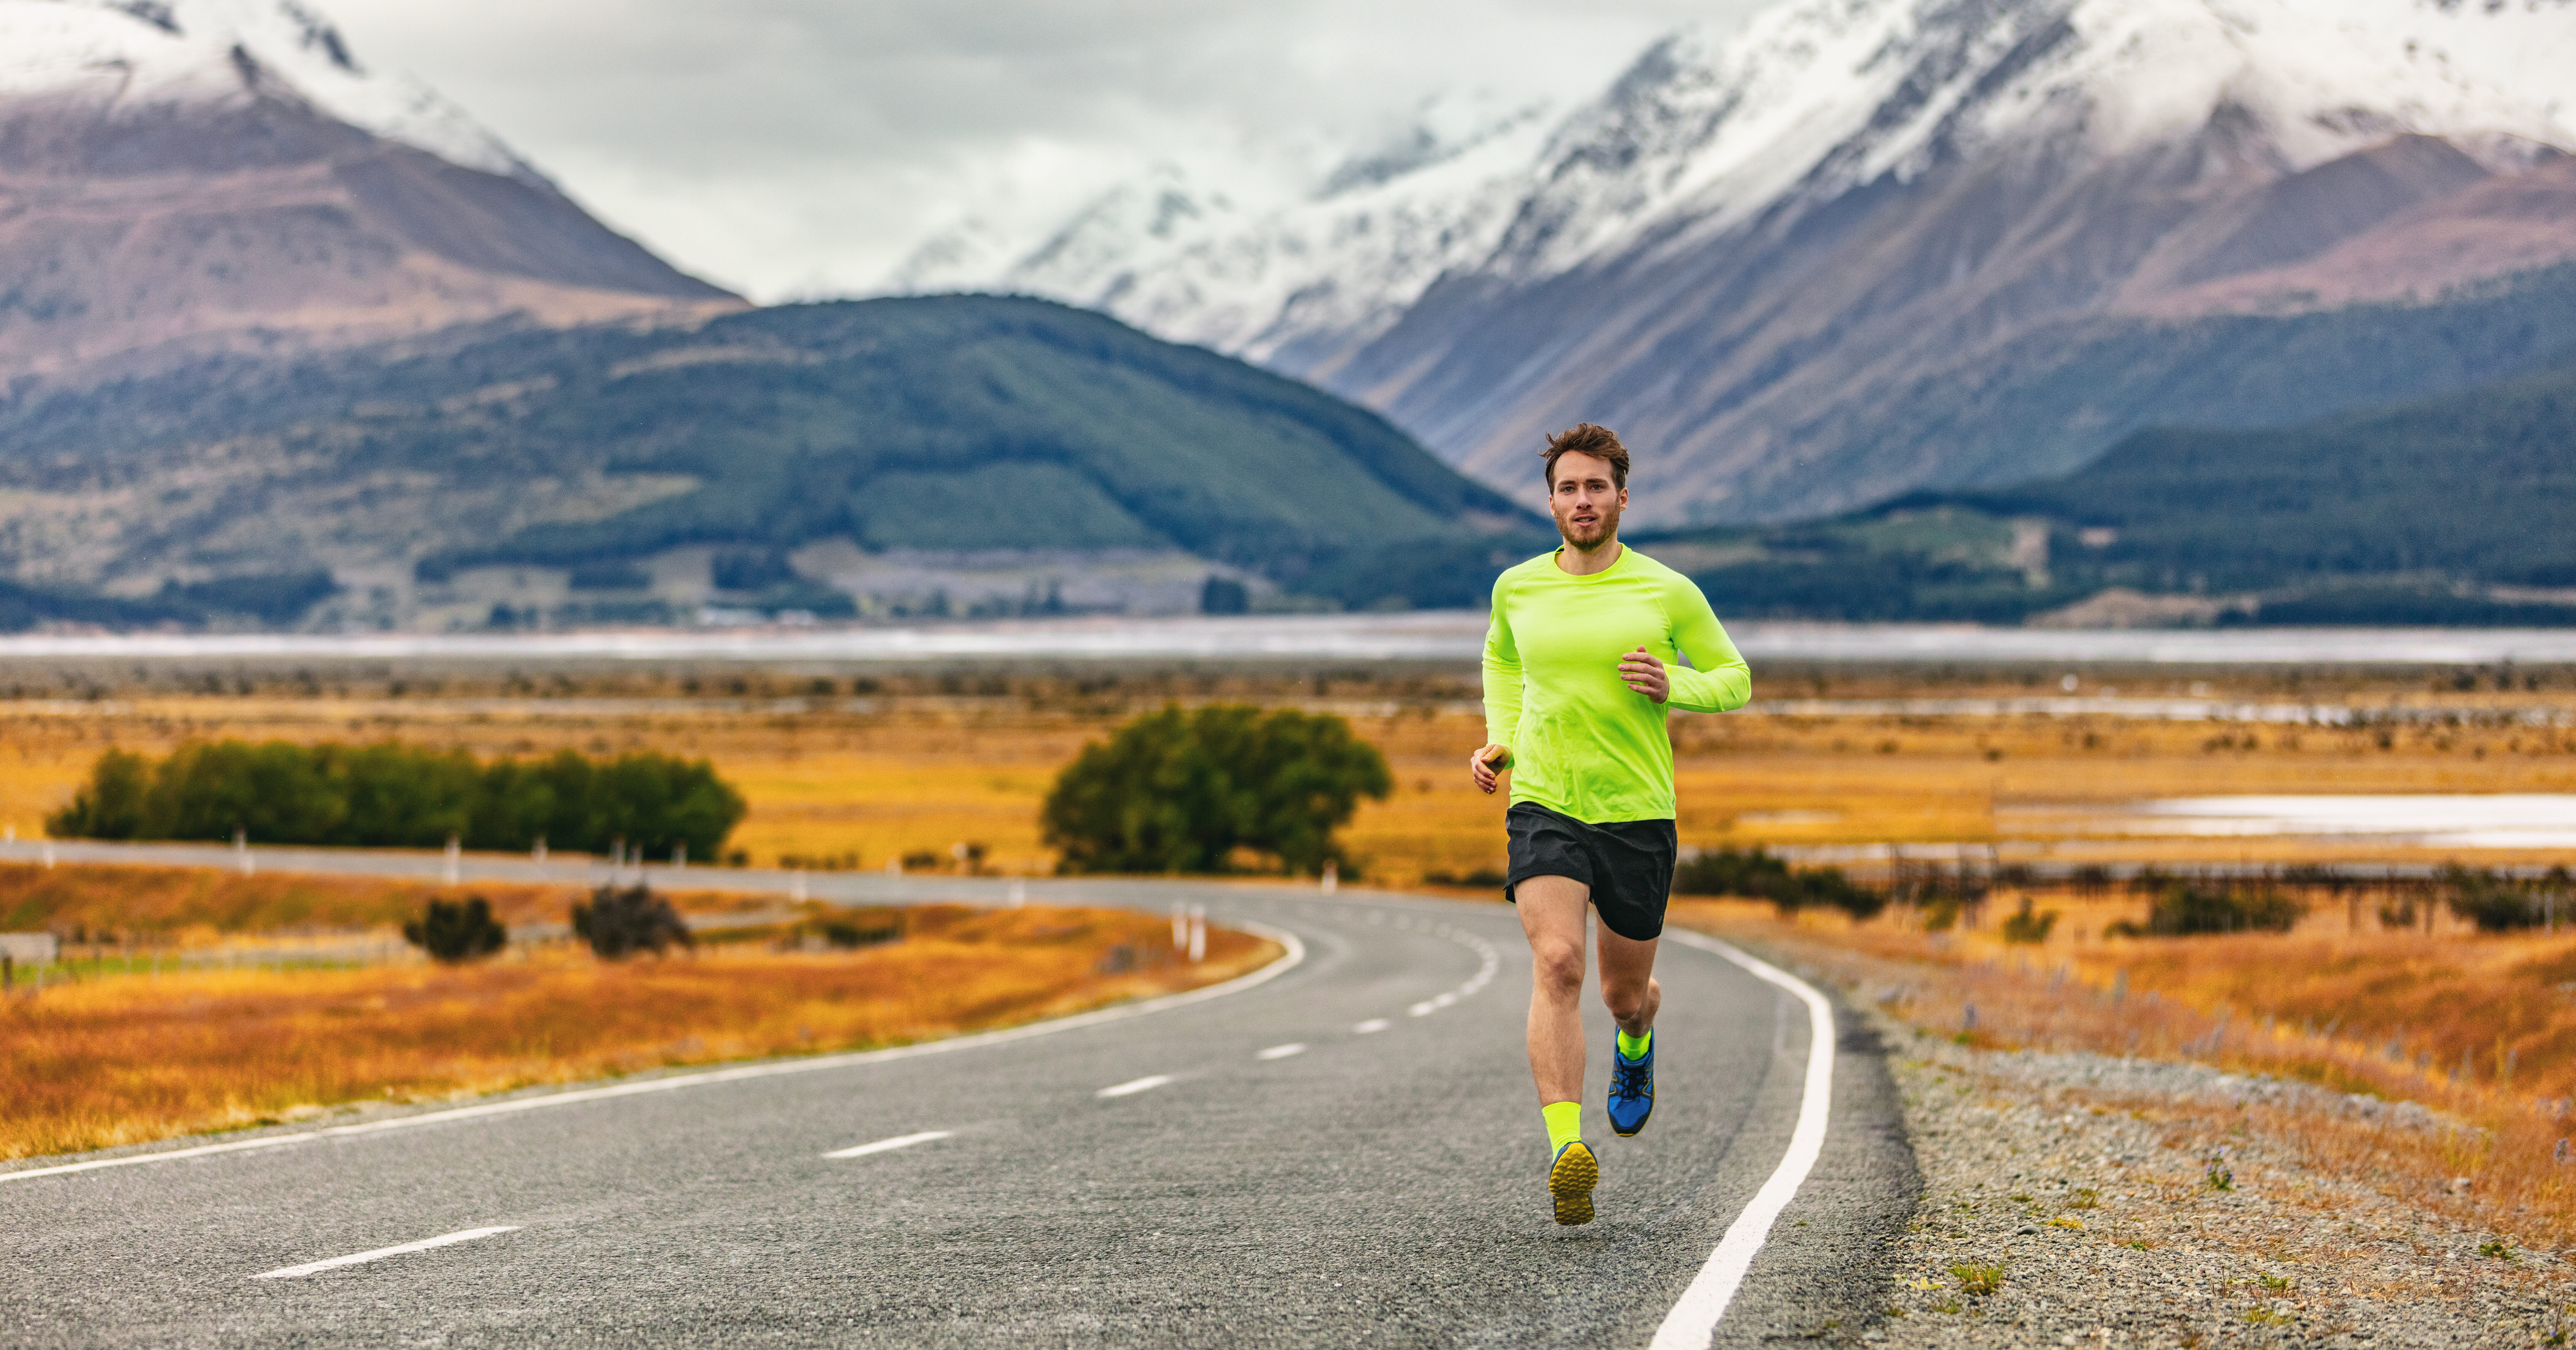 A runner is completing the long run with mountains in the background. But "what if I can't do my long run?"